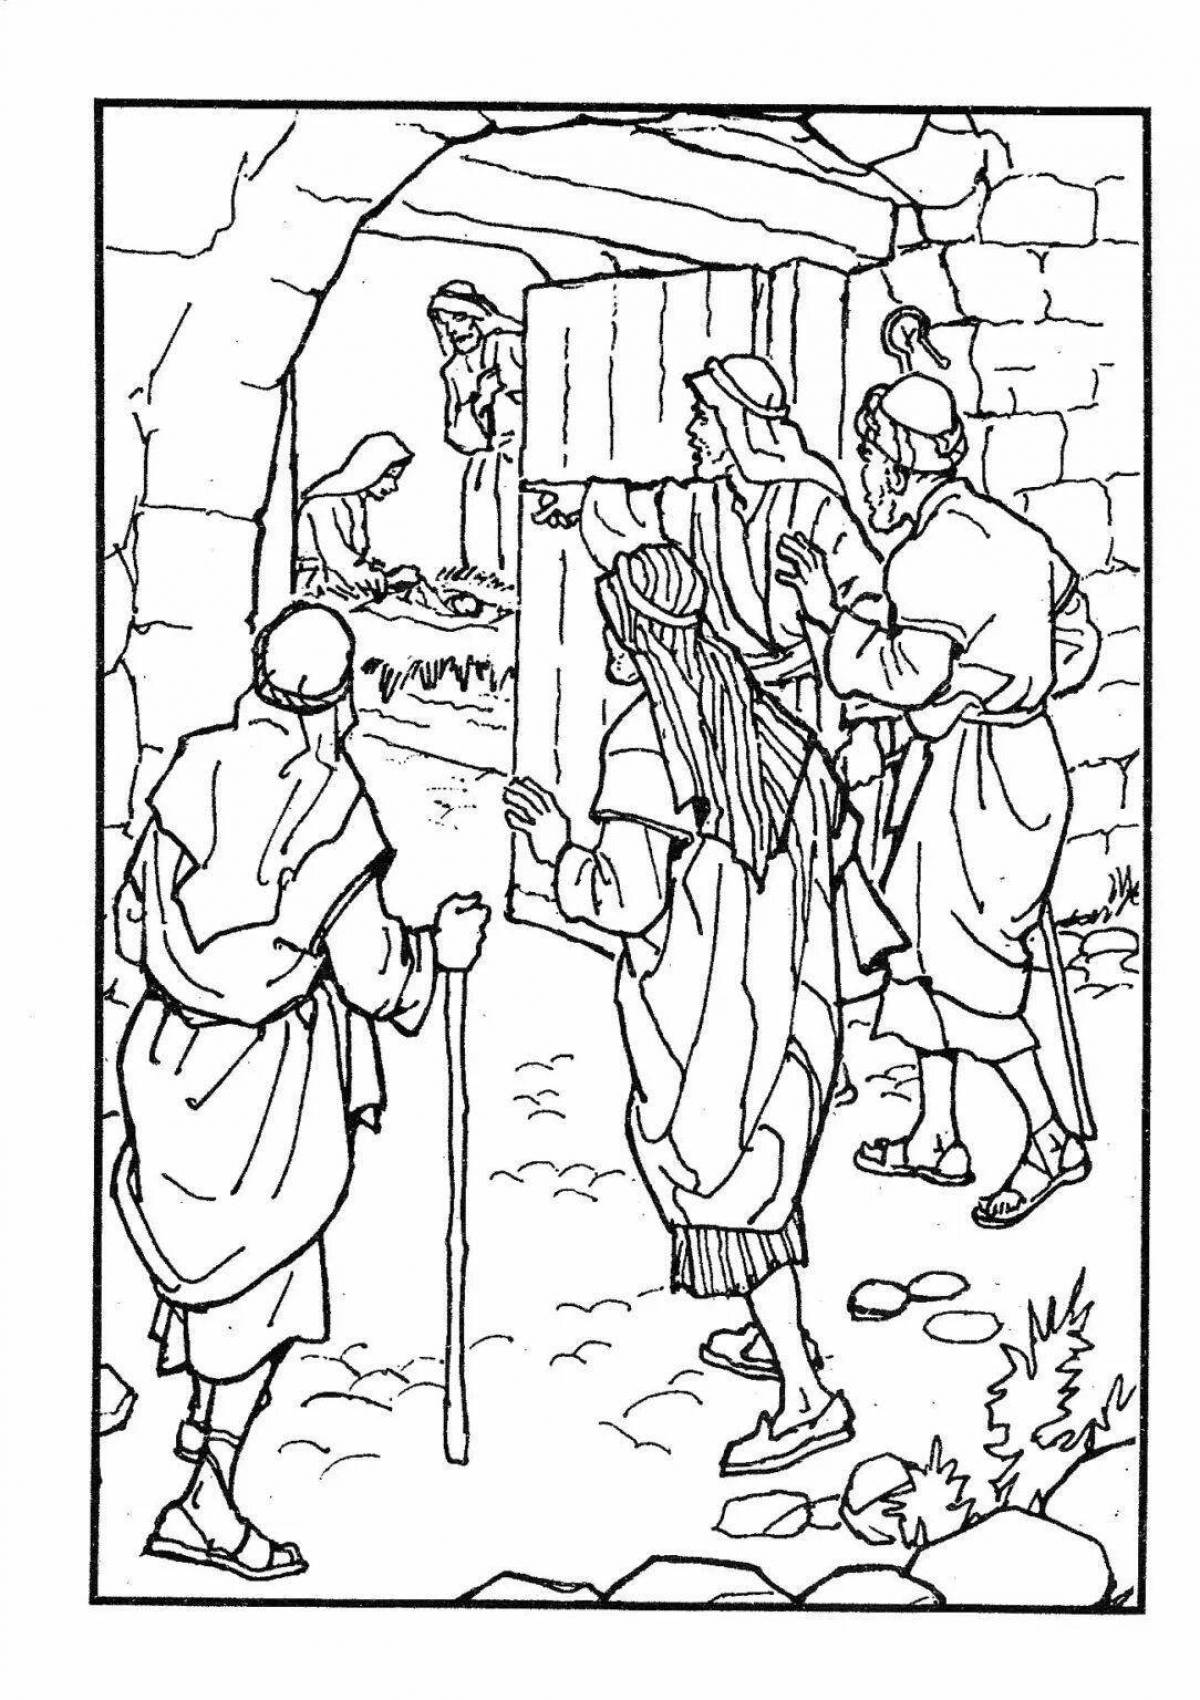 Coloring page jesus in the manger